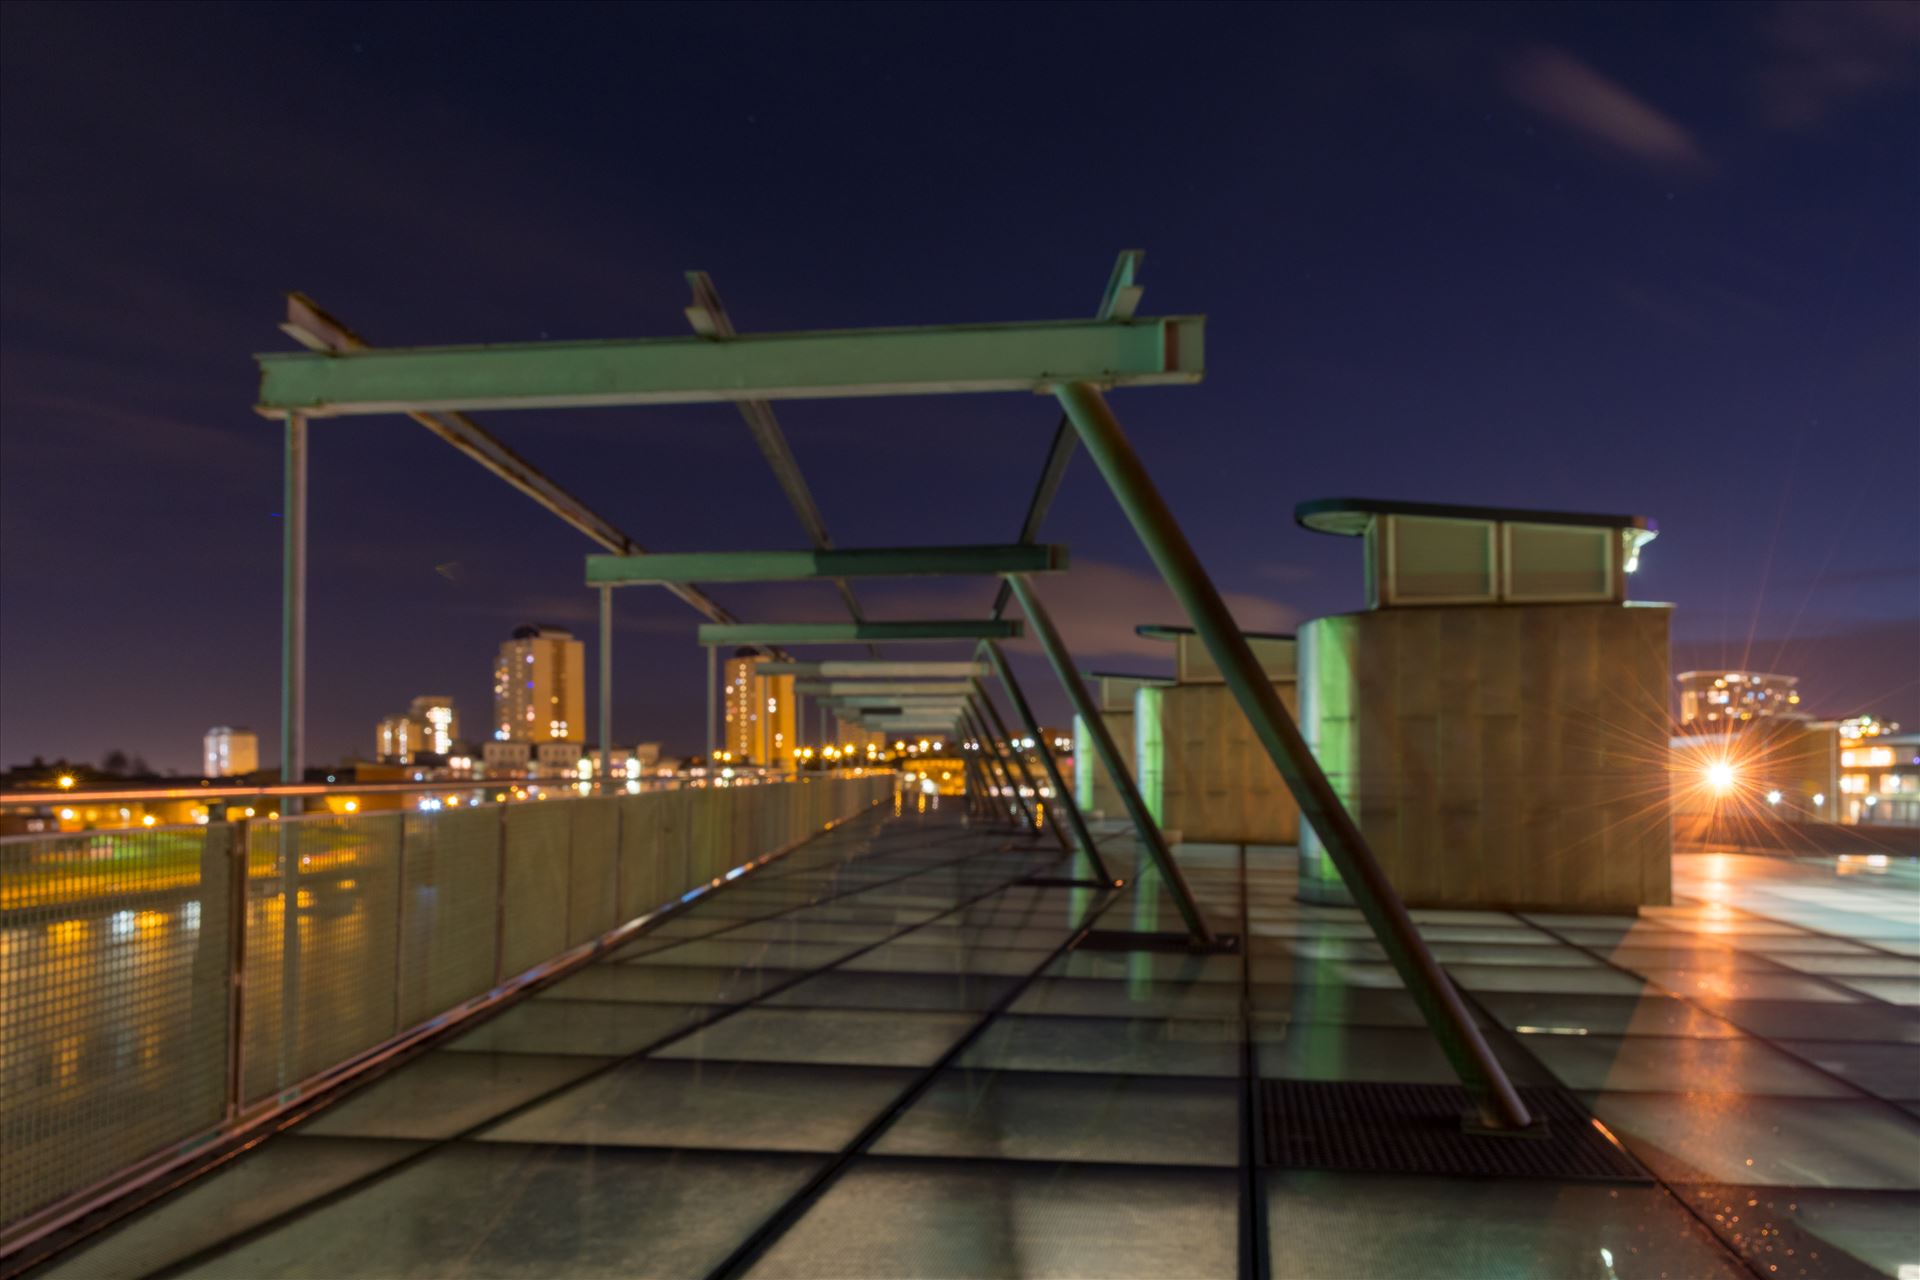 'Up on the Roof', National Glass Centre,Sunderland